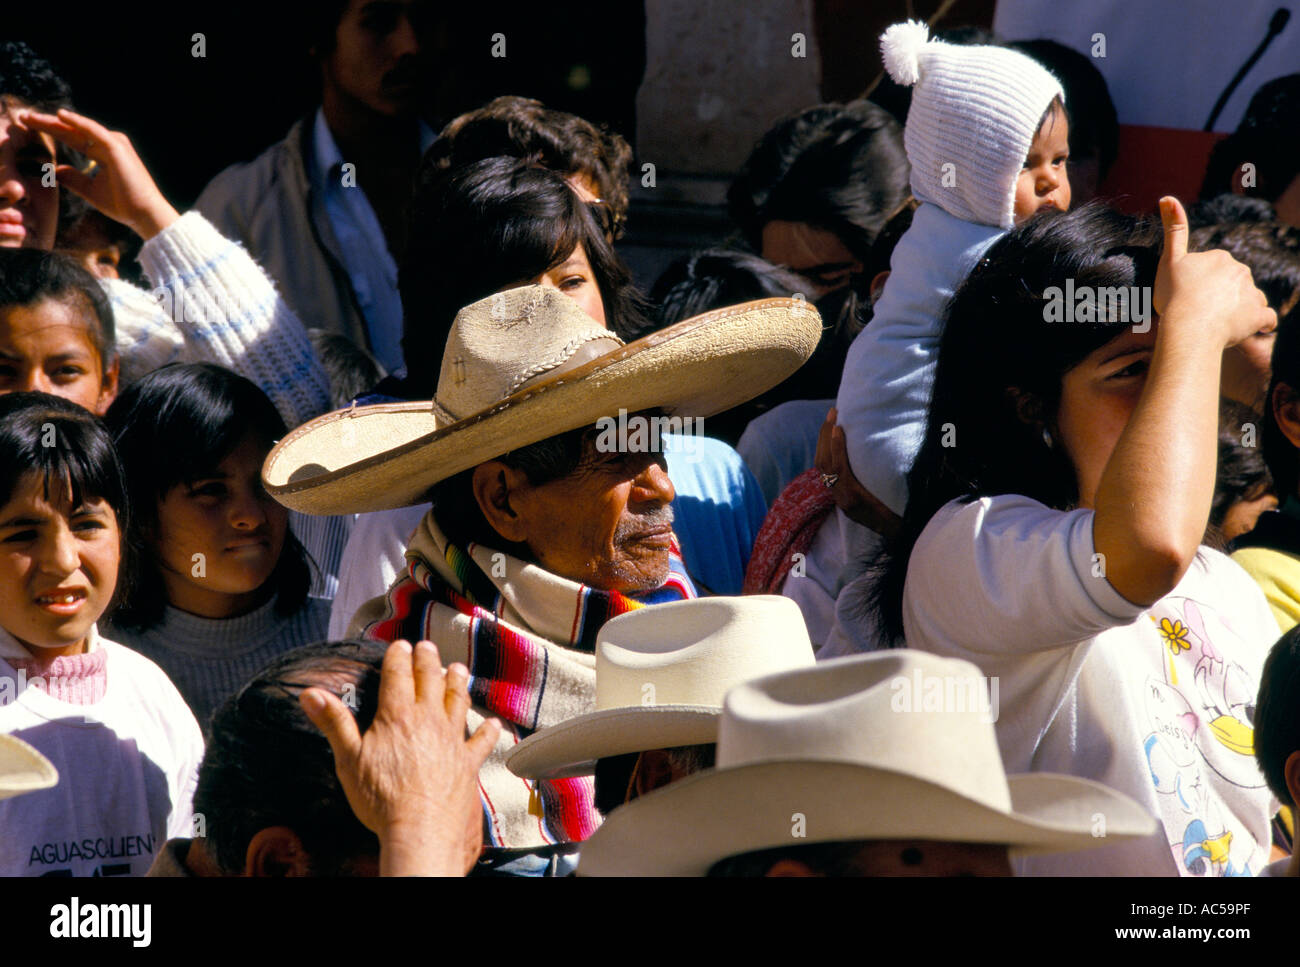 ELDERLY MAN IN THE CROWD WEARING A TRADITIONAL MEXICAN HAT Stock Photo